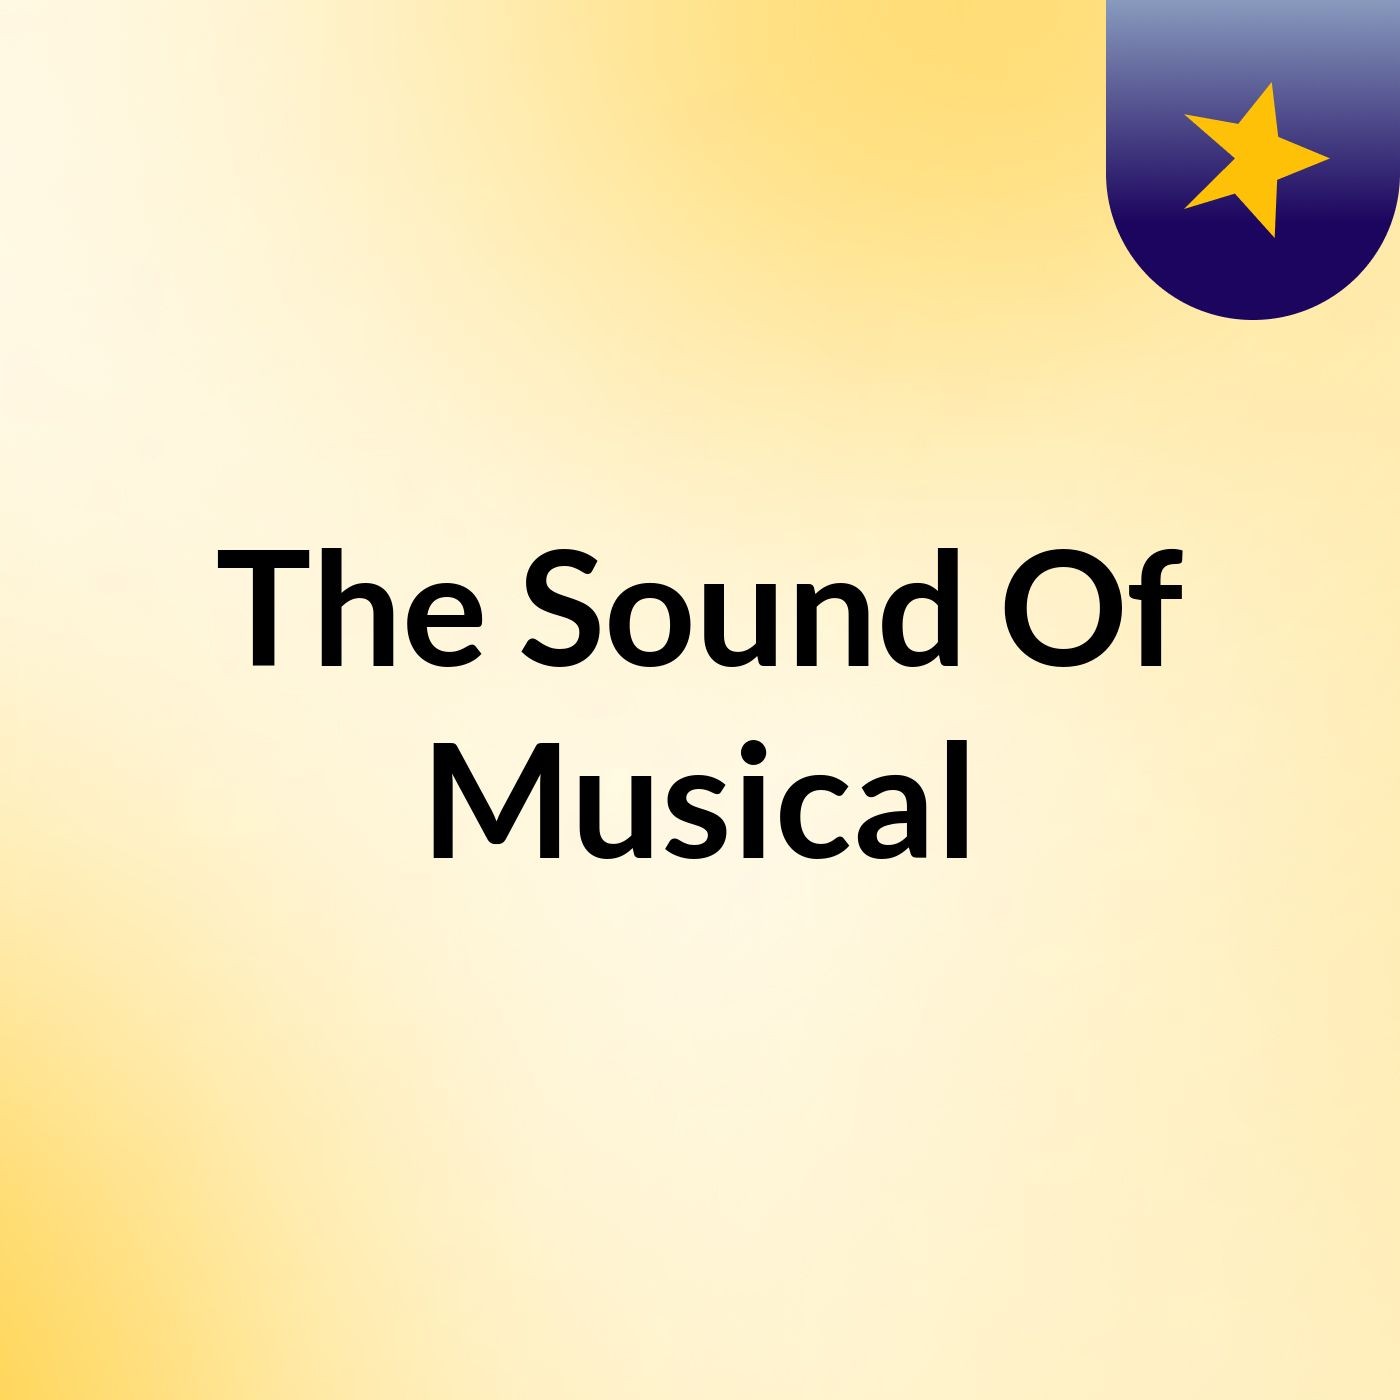 The Sound Of Musical